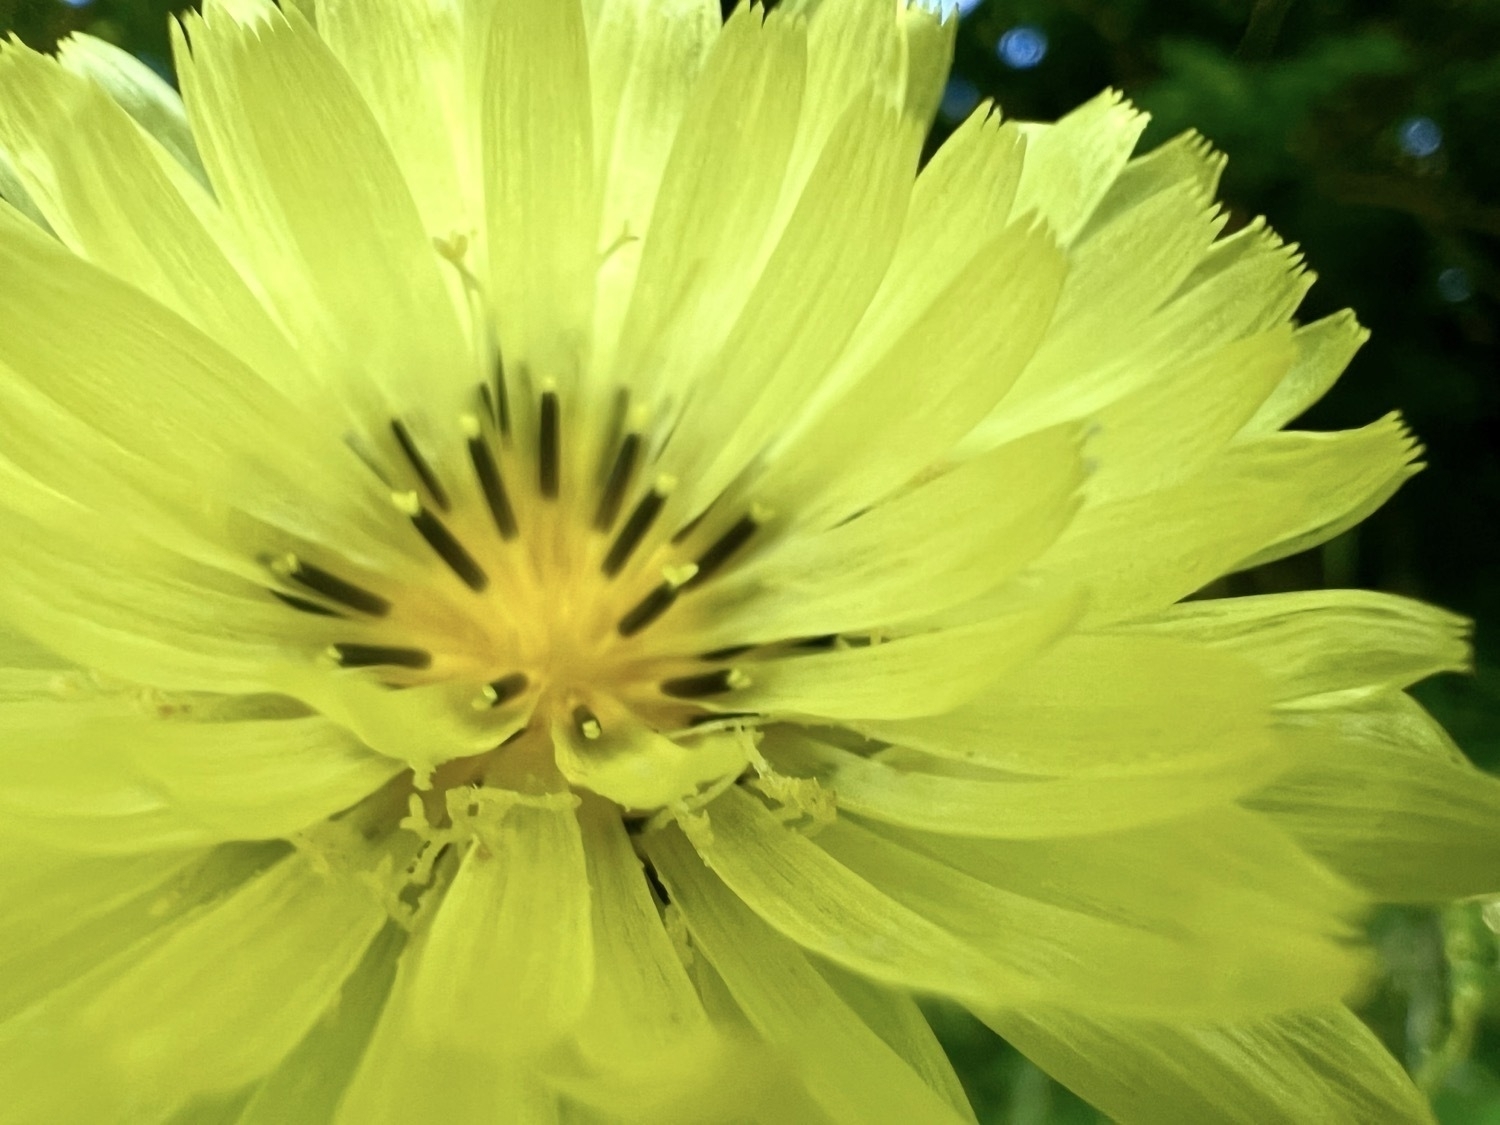 A close up image of a many petaled yellow flower with a darker yellow, orangish center that has 20 or so dark brown to black colored stamens, each tipped with a yellow anther. The tip of each petal is fringed. 